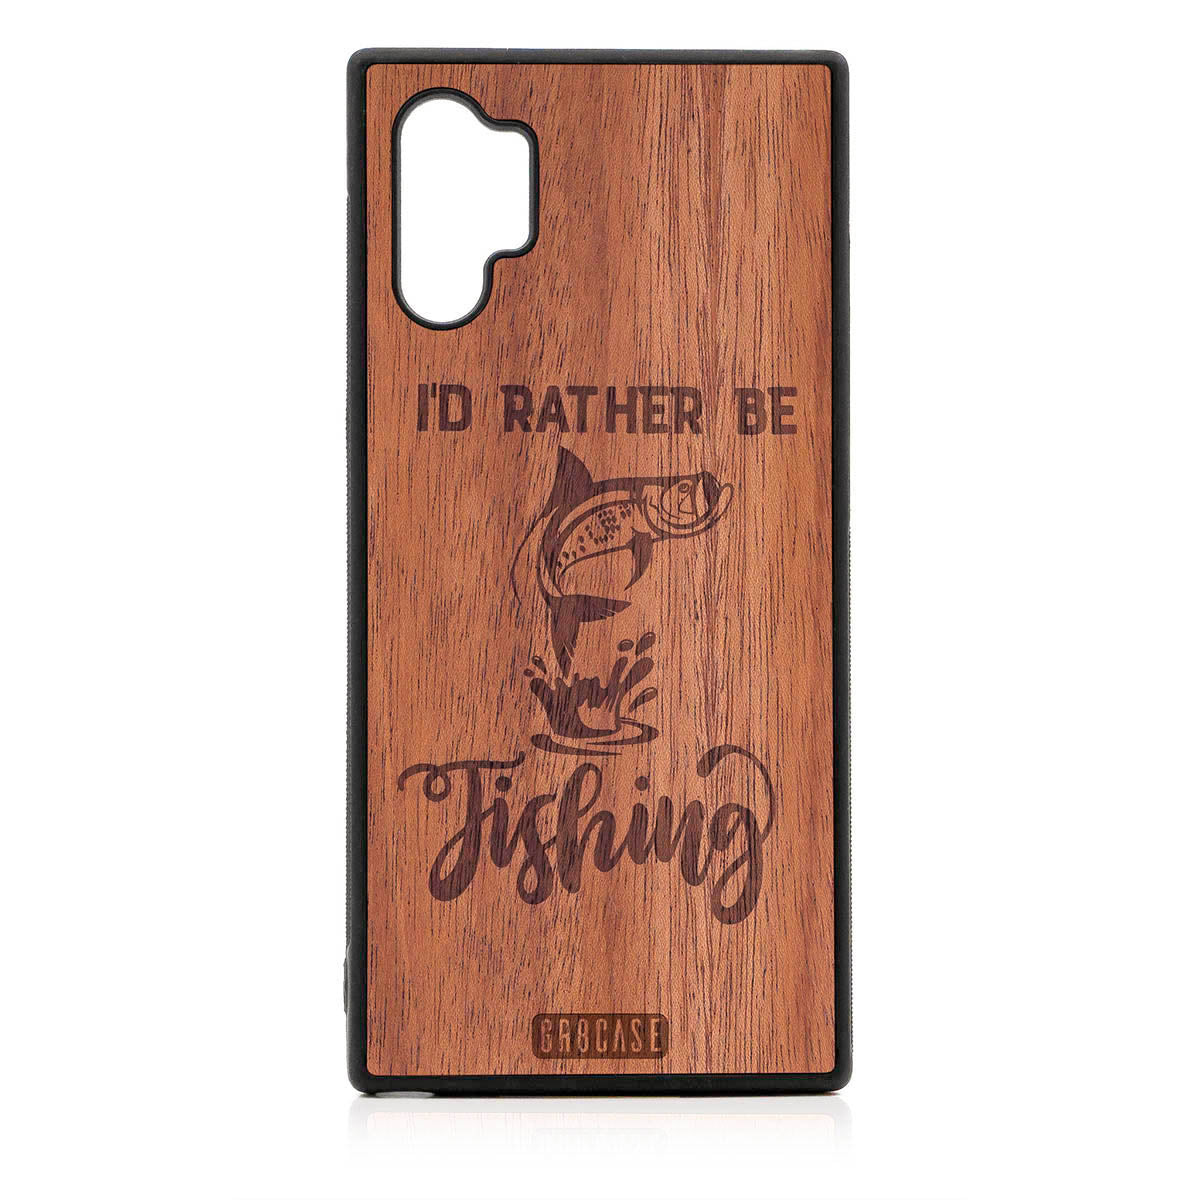 I'D Rather Be Fishing Design Wood Case For Samsung Galaxy Note 10 Plus